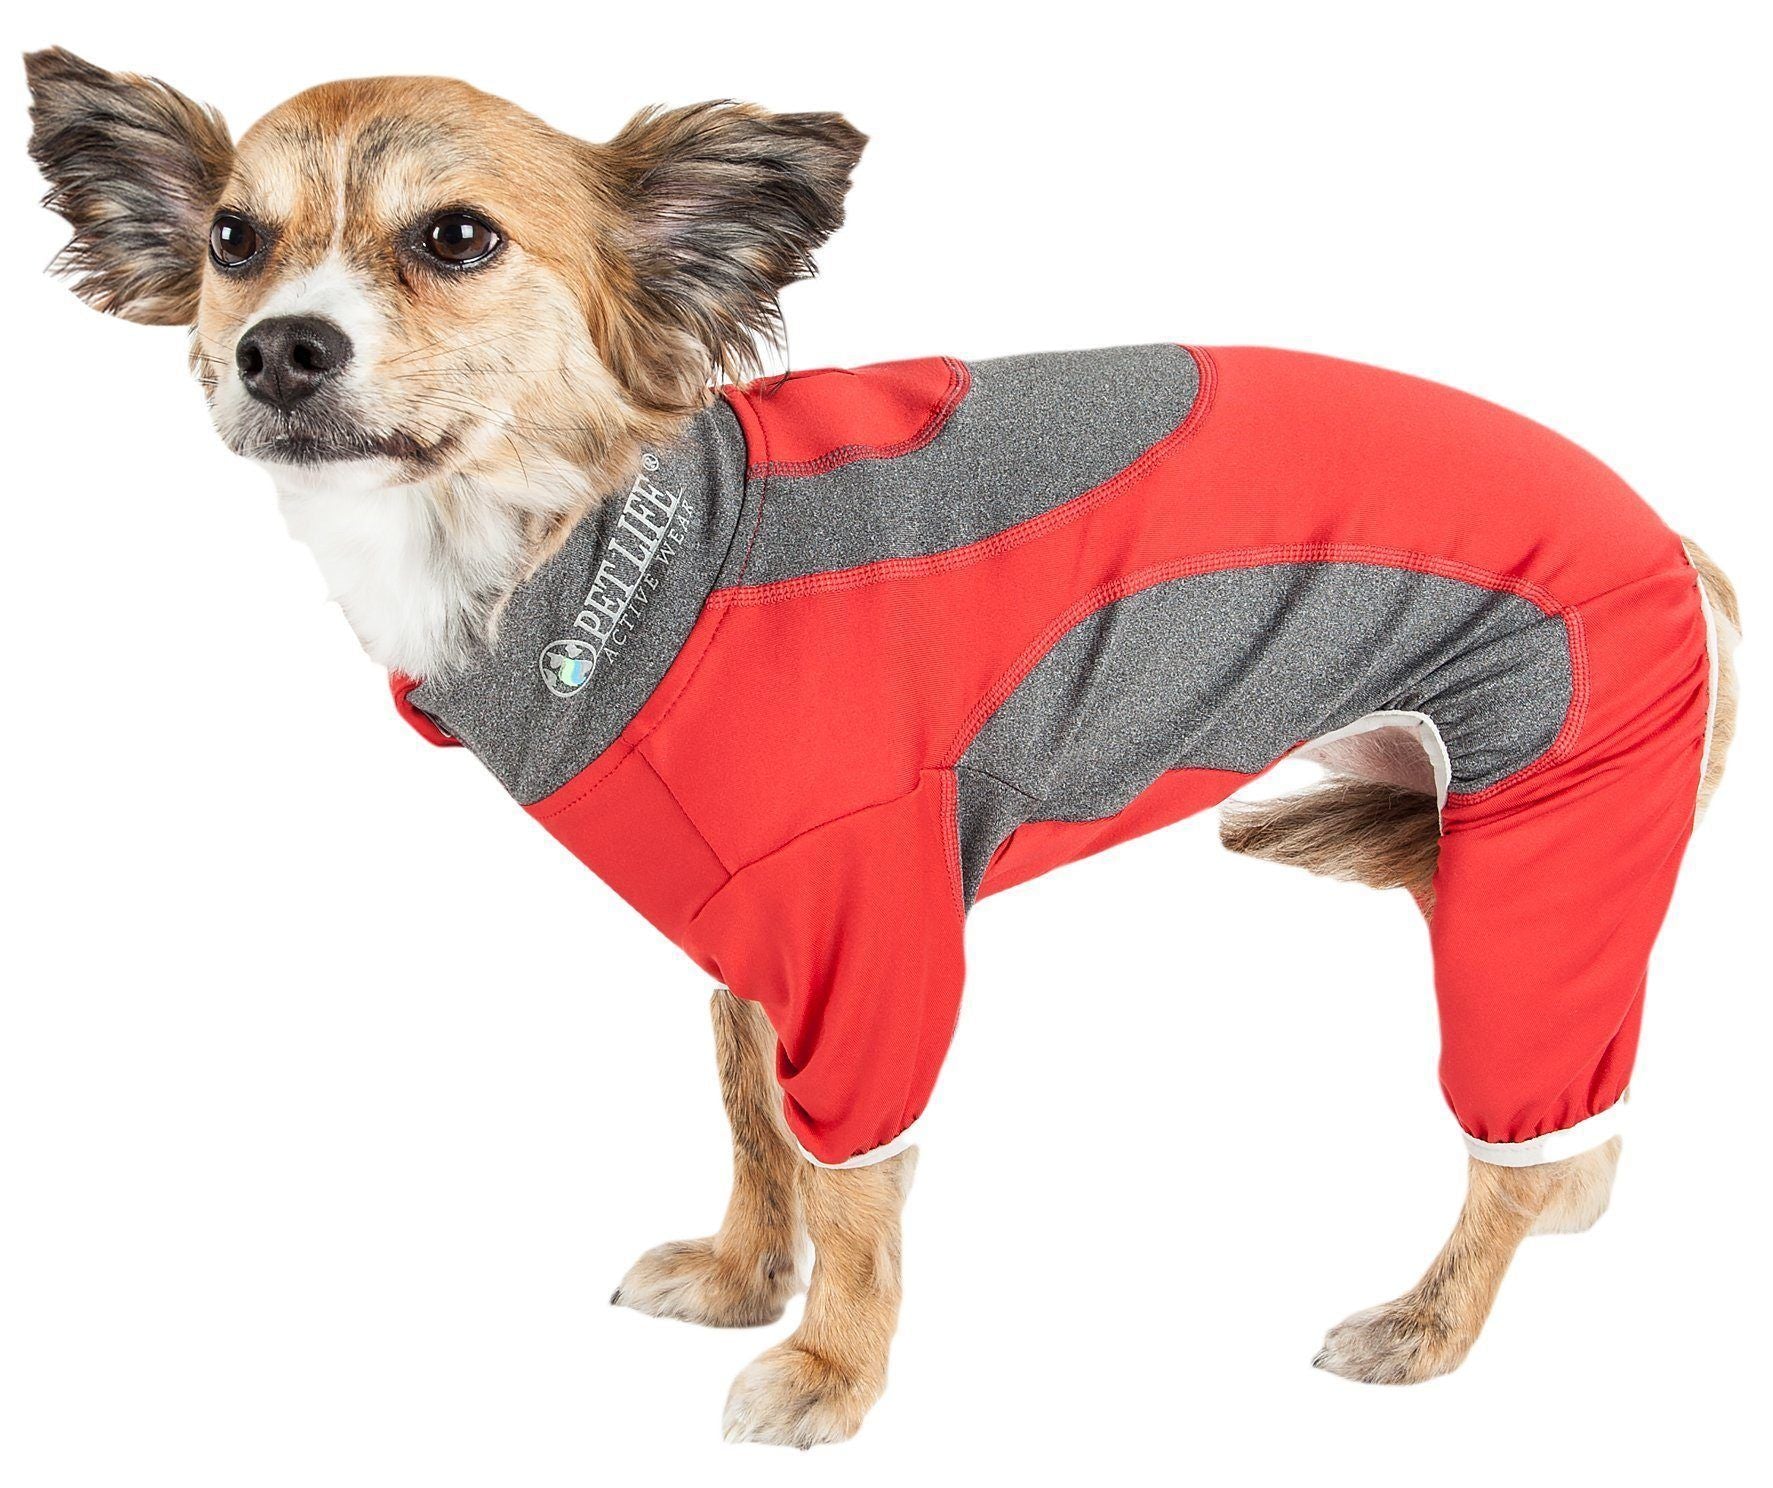 Pet Life ® Active 'Warm-Pup' Stretchy and Quick-Drying Fitness Dog Yoga Warm-Up Tracksuit X-Small Red and Slate Gray